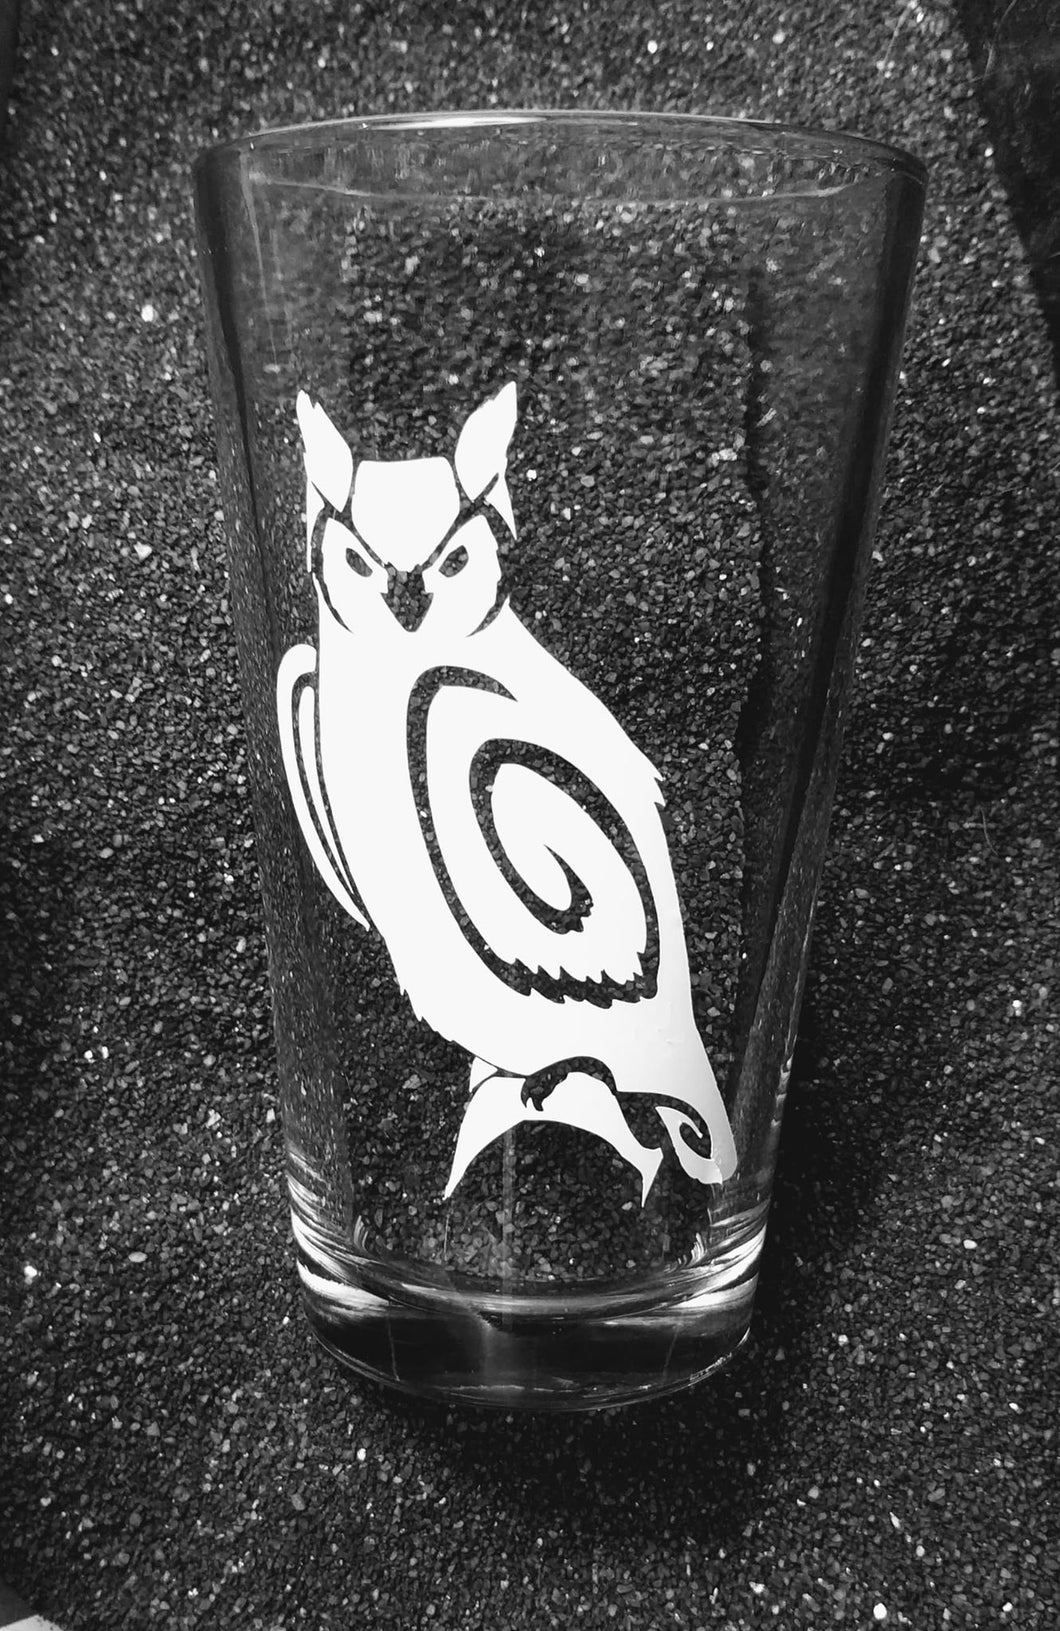 Stormslegacy Tattoo owl etched glass pint tumbler cup